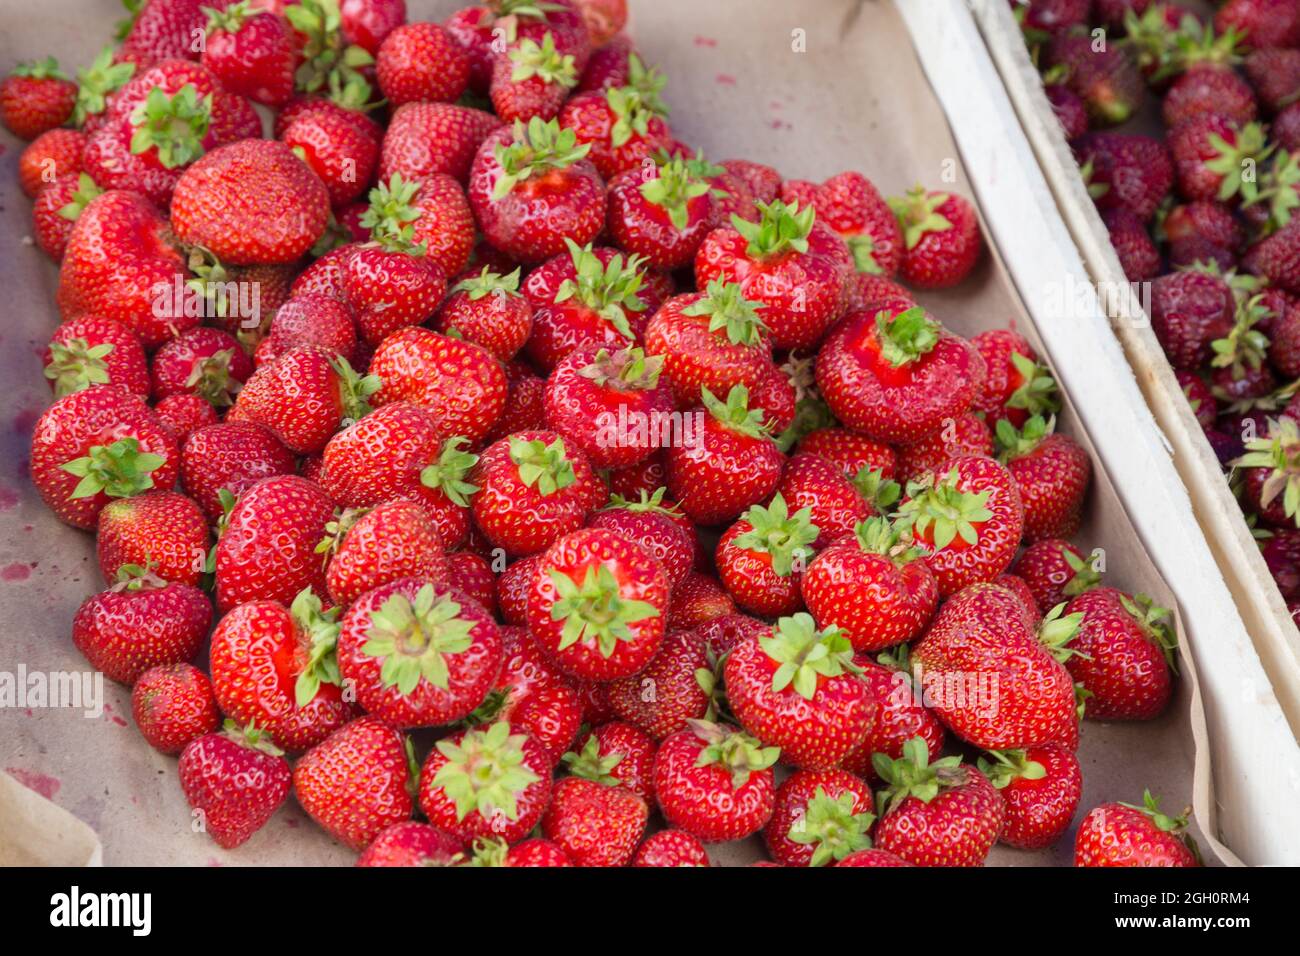 Huge red juicy ripe strawberries at market in the city, harvest at the dacha. Stock Photo